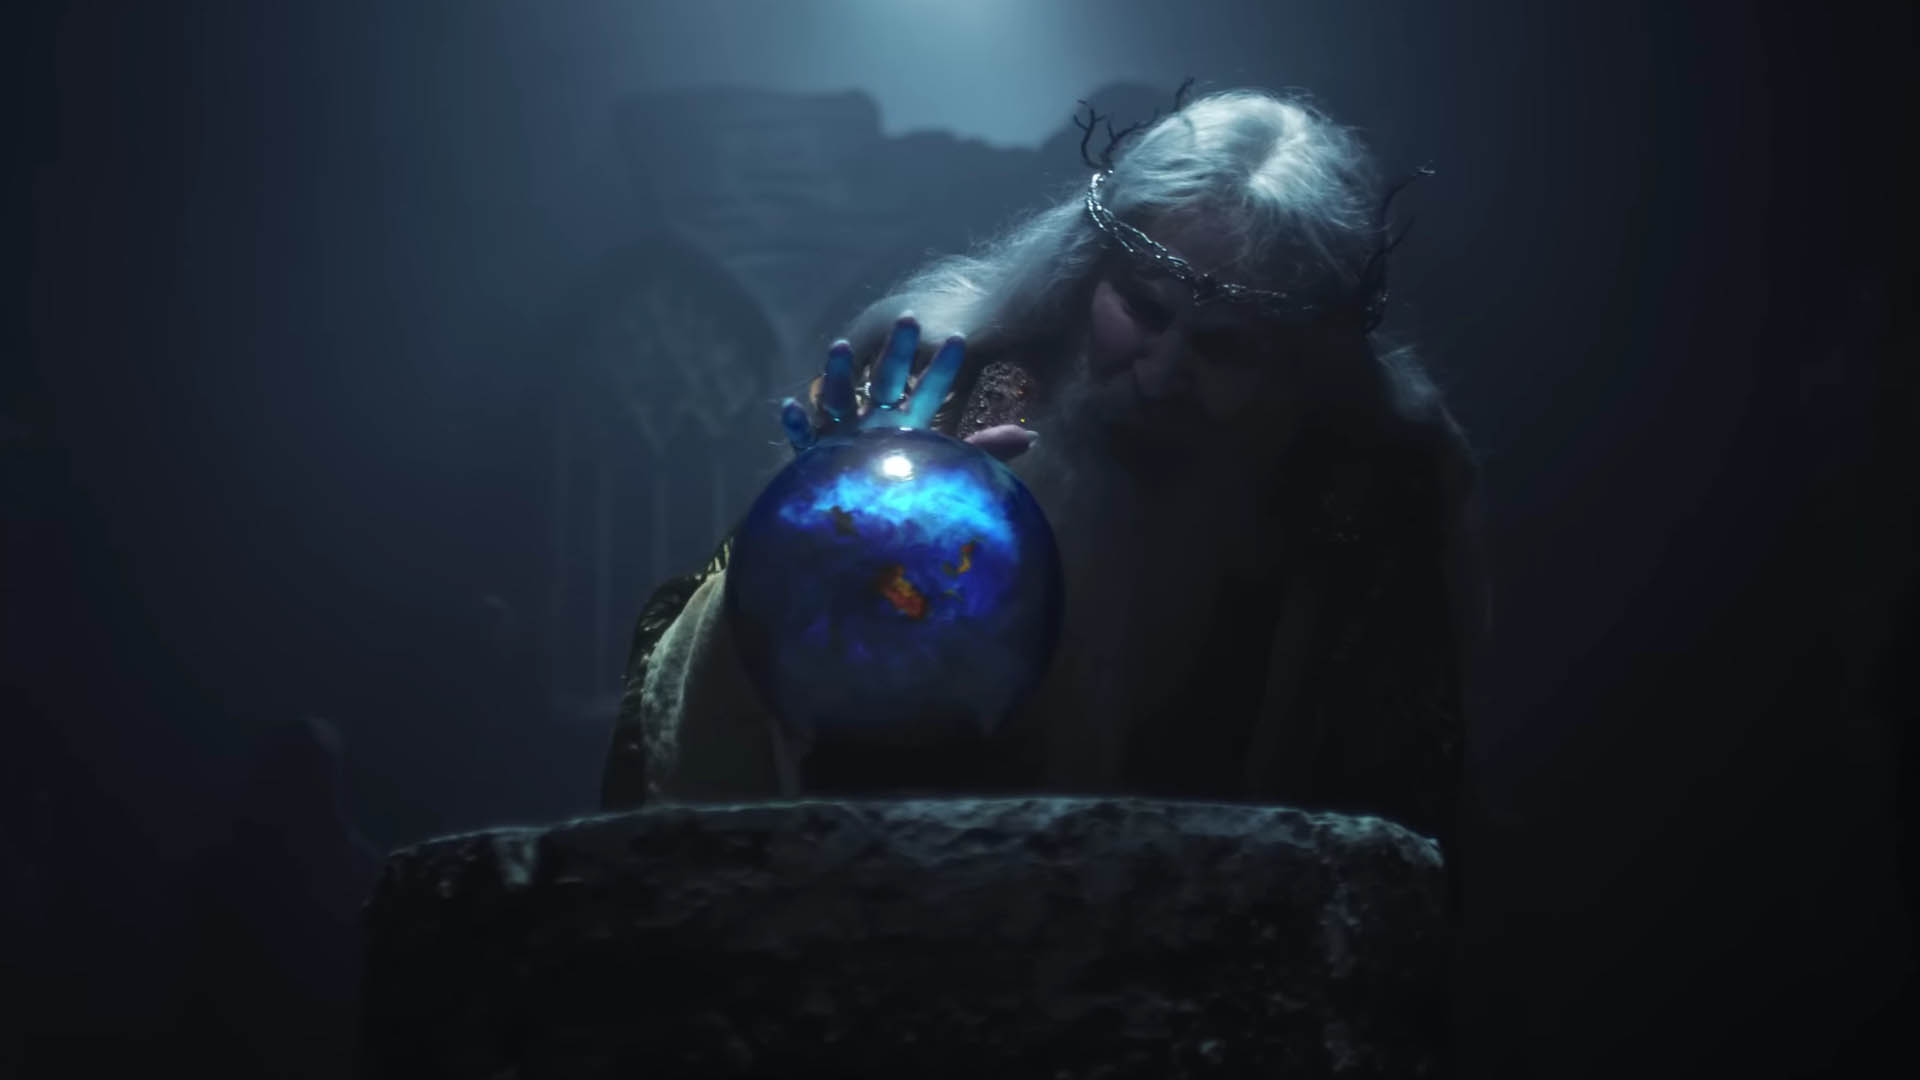 introduces Niche Fallen orb-pondering Gamer new story in - trailer Atlas live-action its